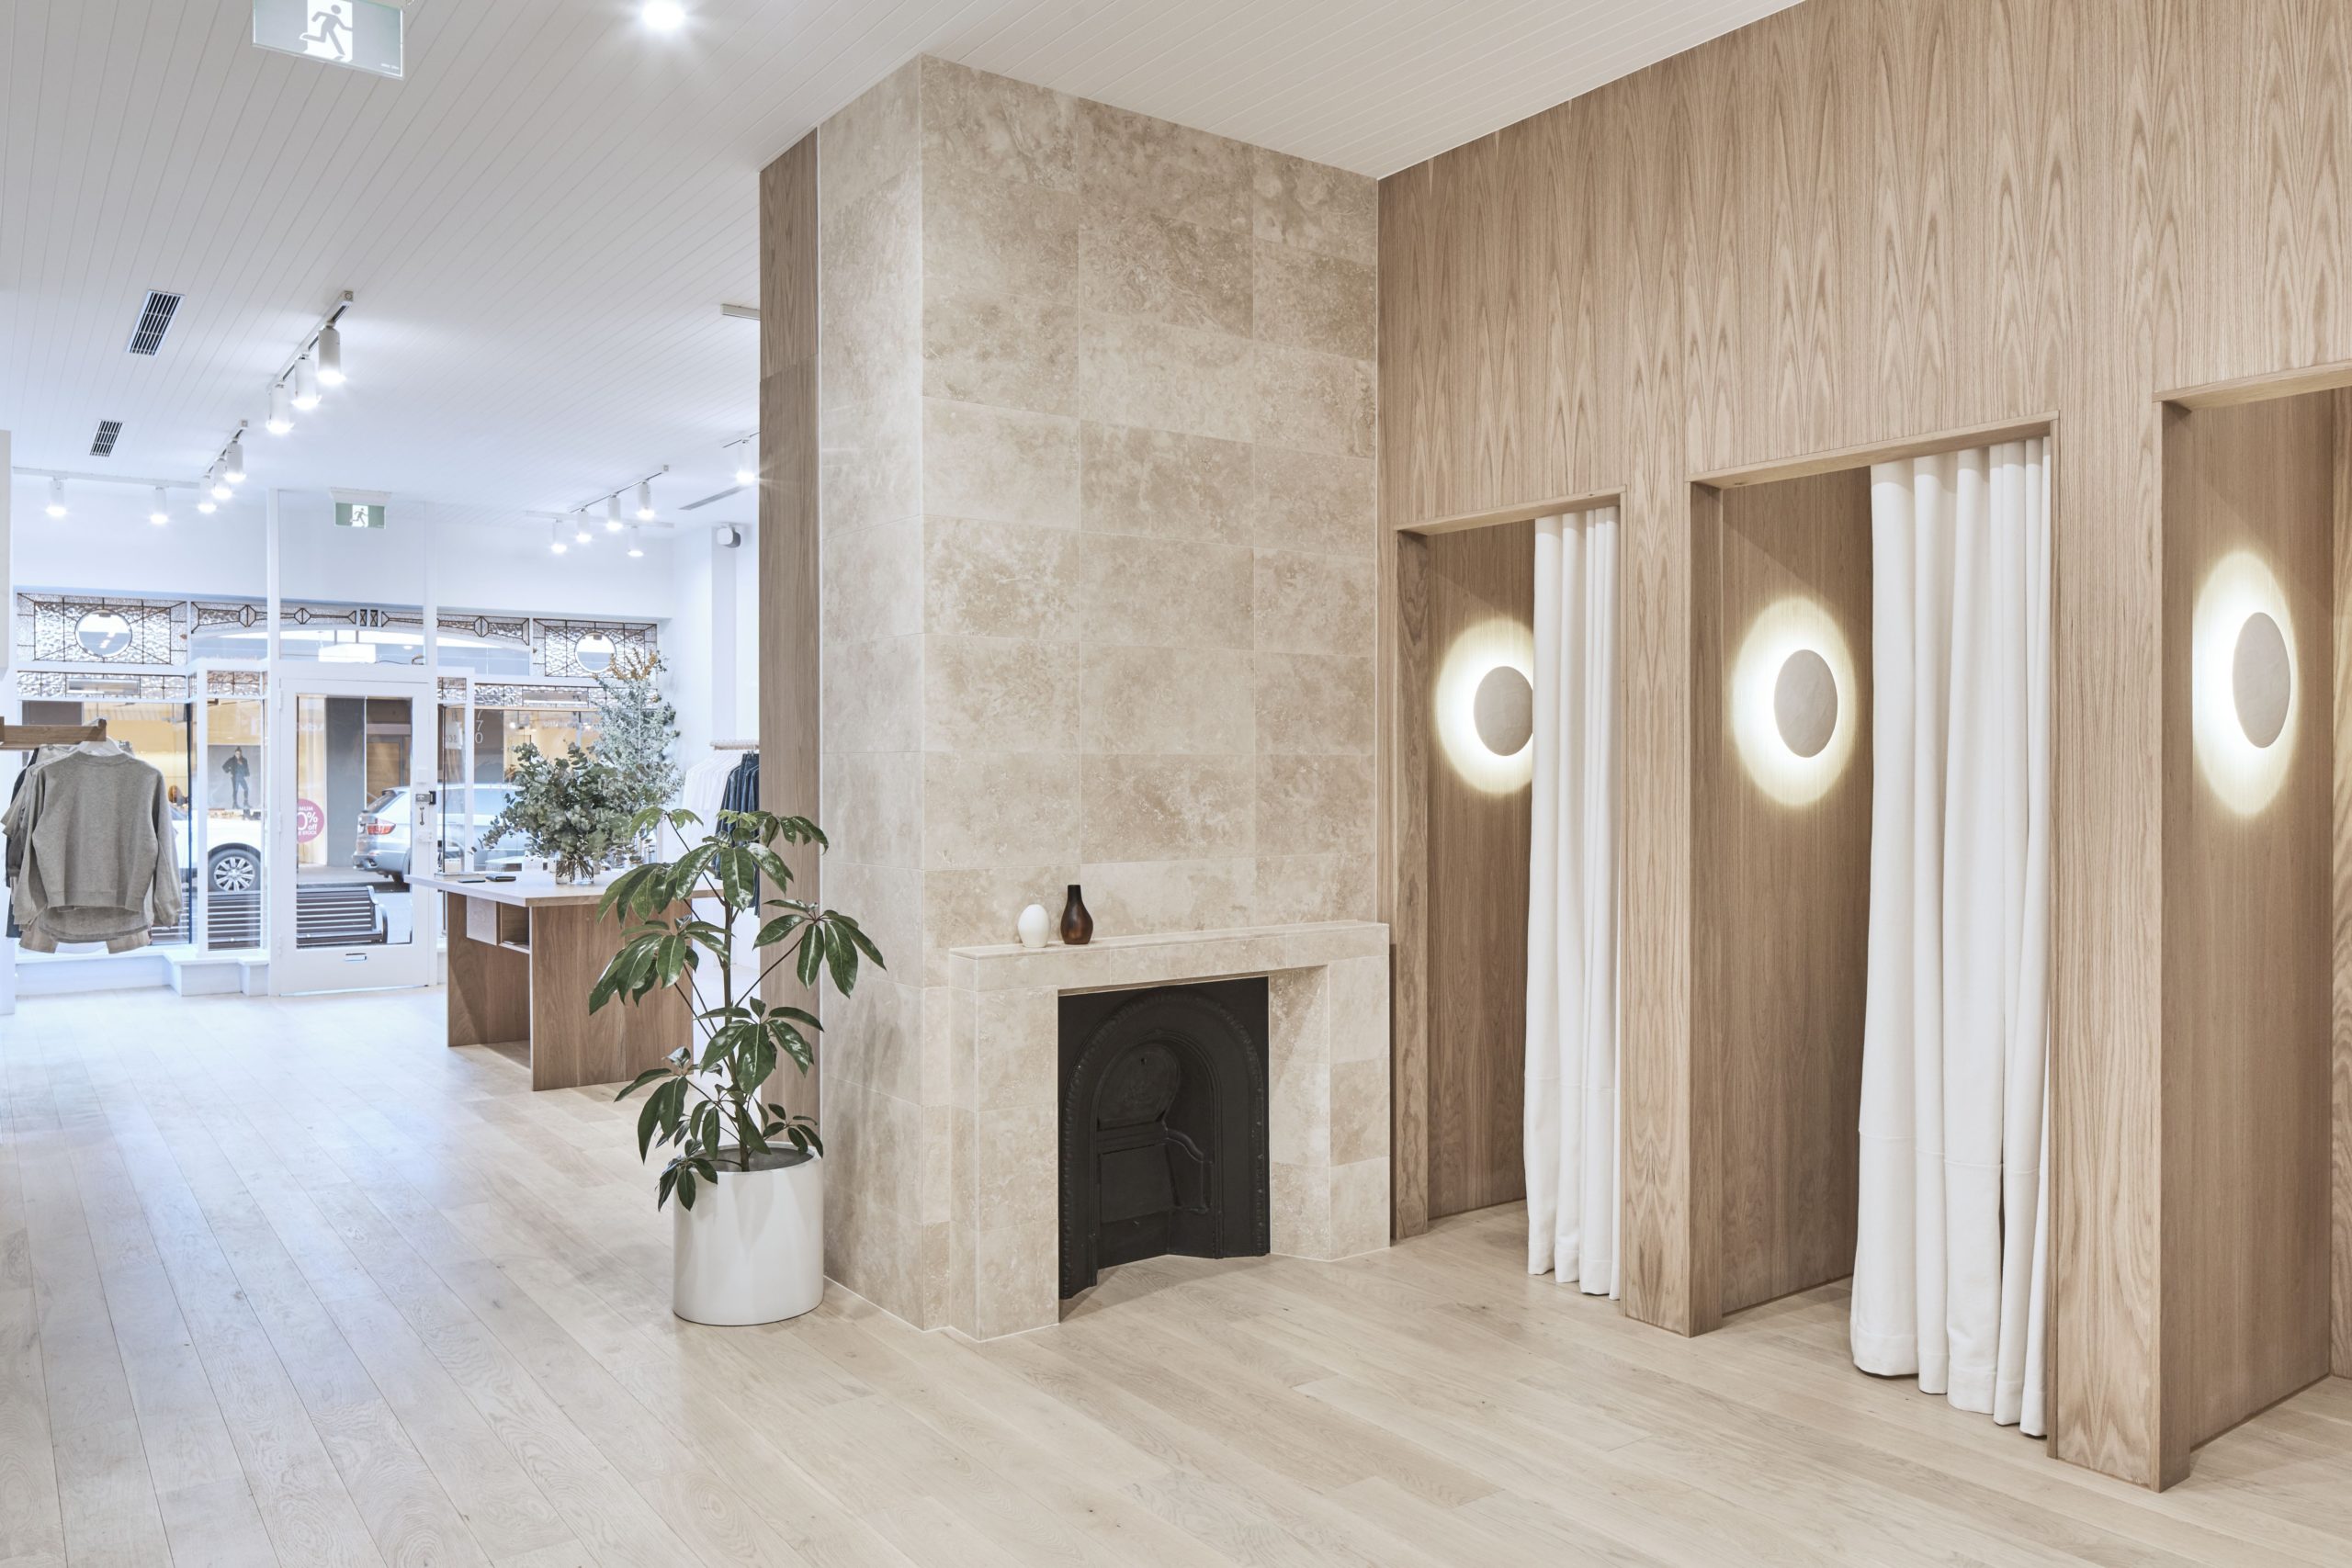 Behind the Boards: Reinventing Retail Spaces with We Are Triibe